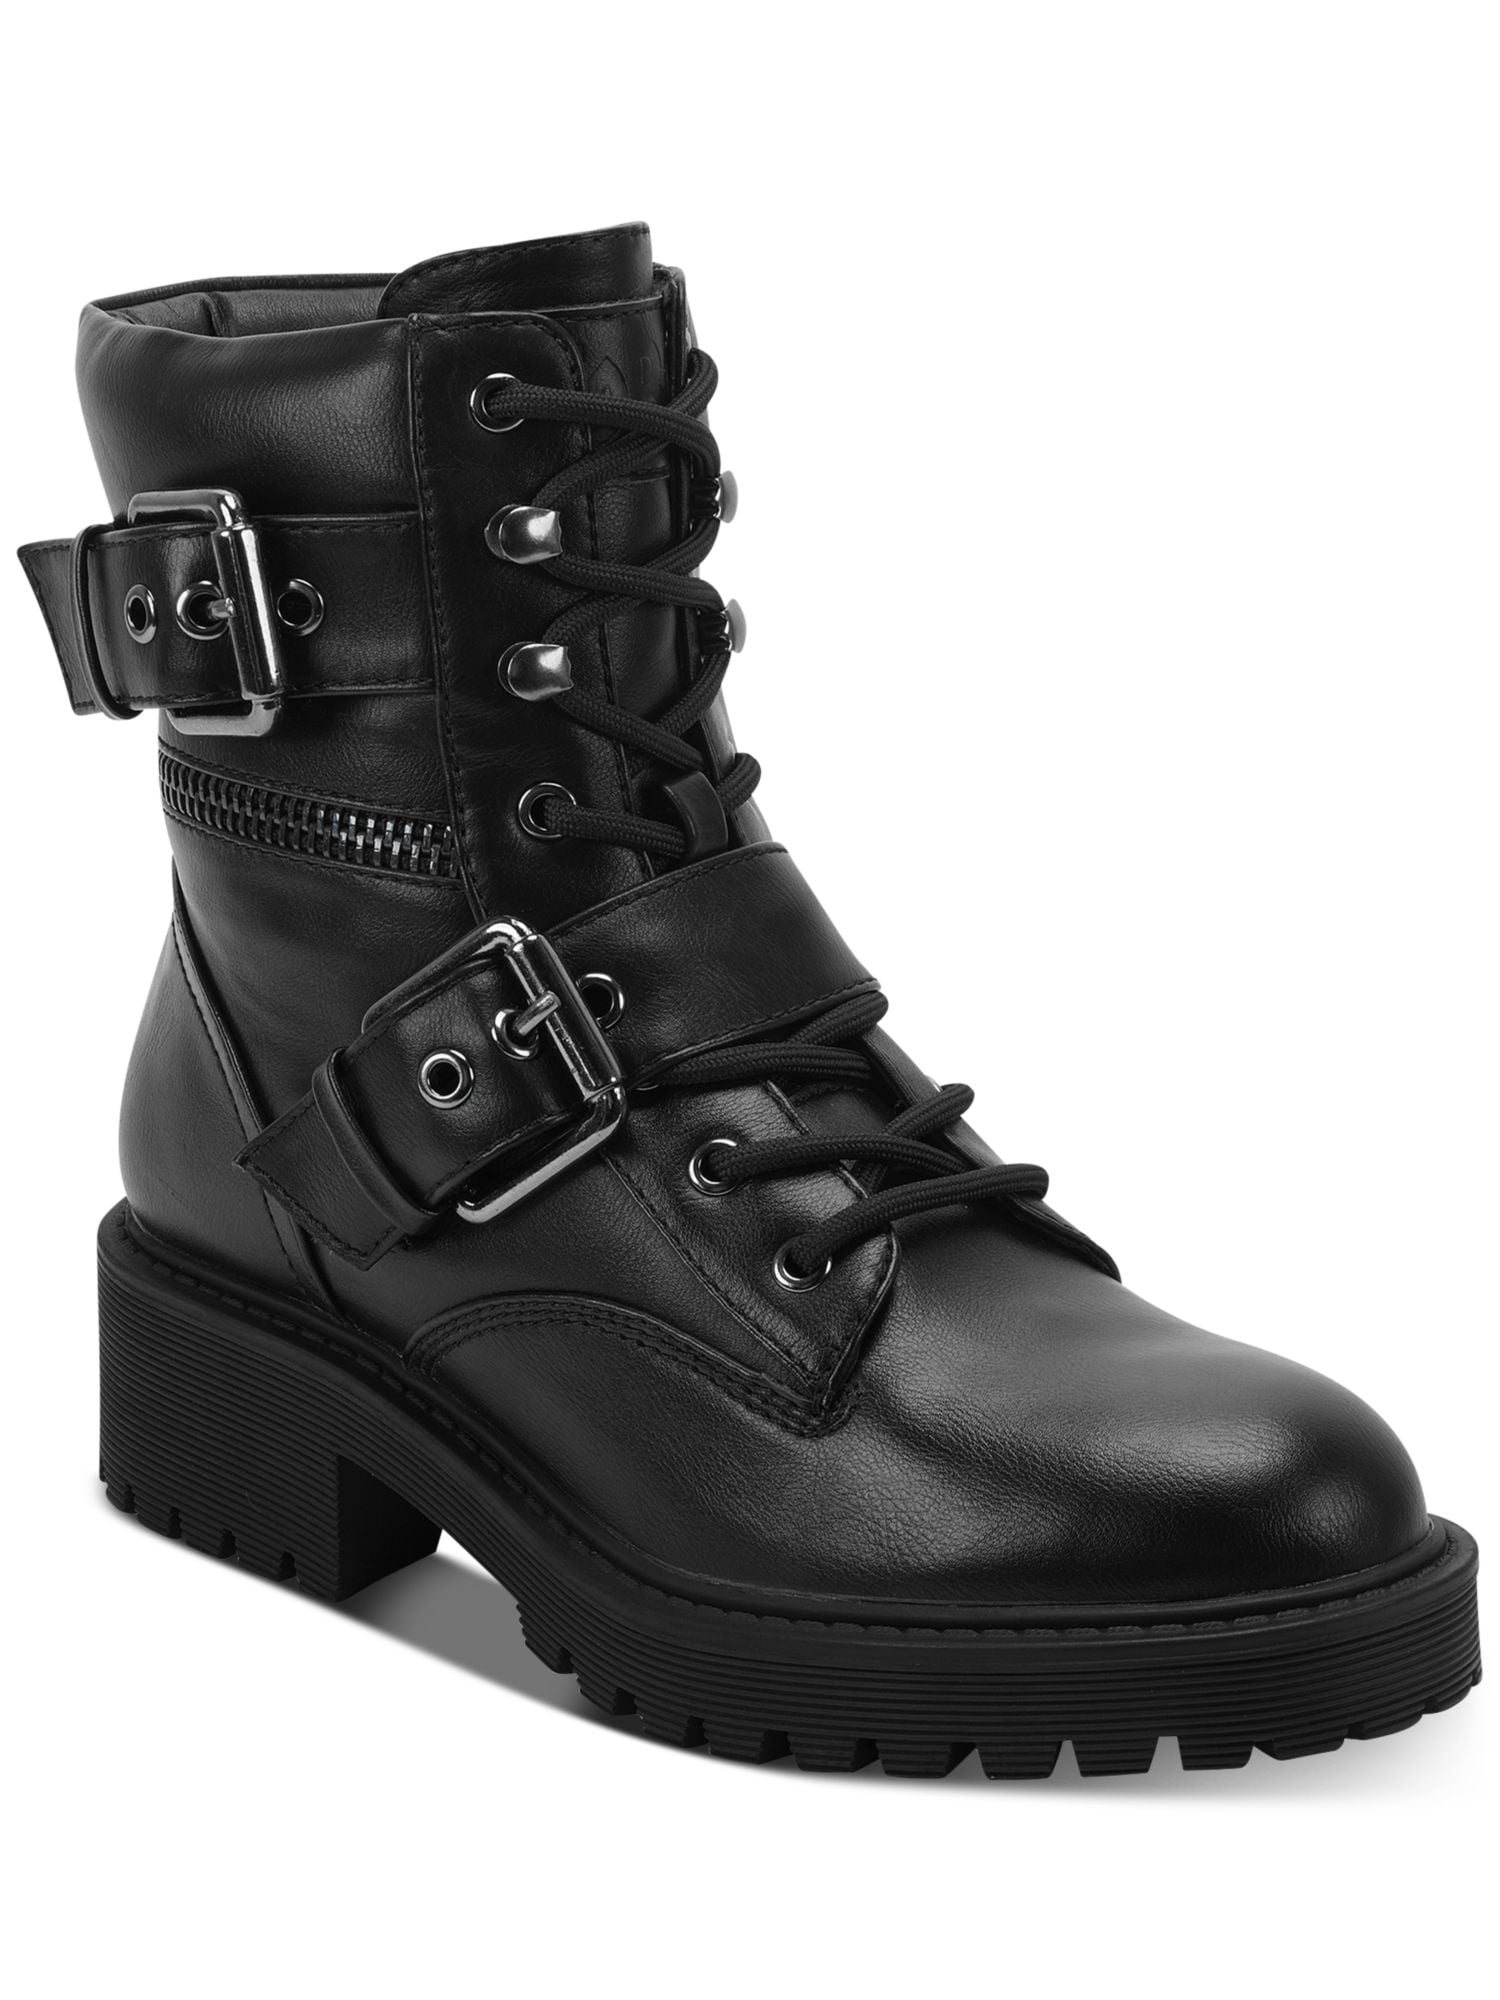 GBG GUESS Womens Black Eyelet Lace Up Cushioned Lug Sole Stretch Buckle ...